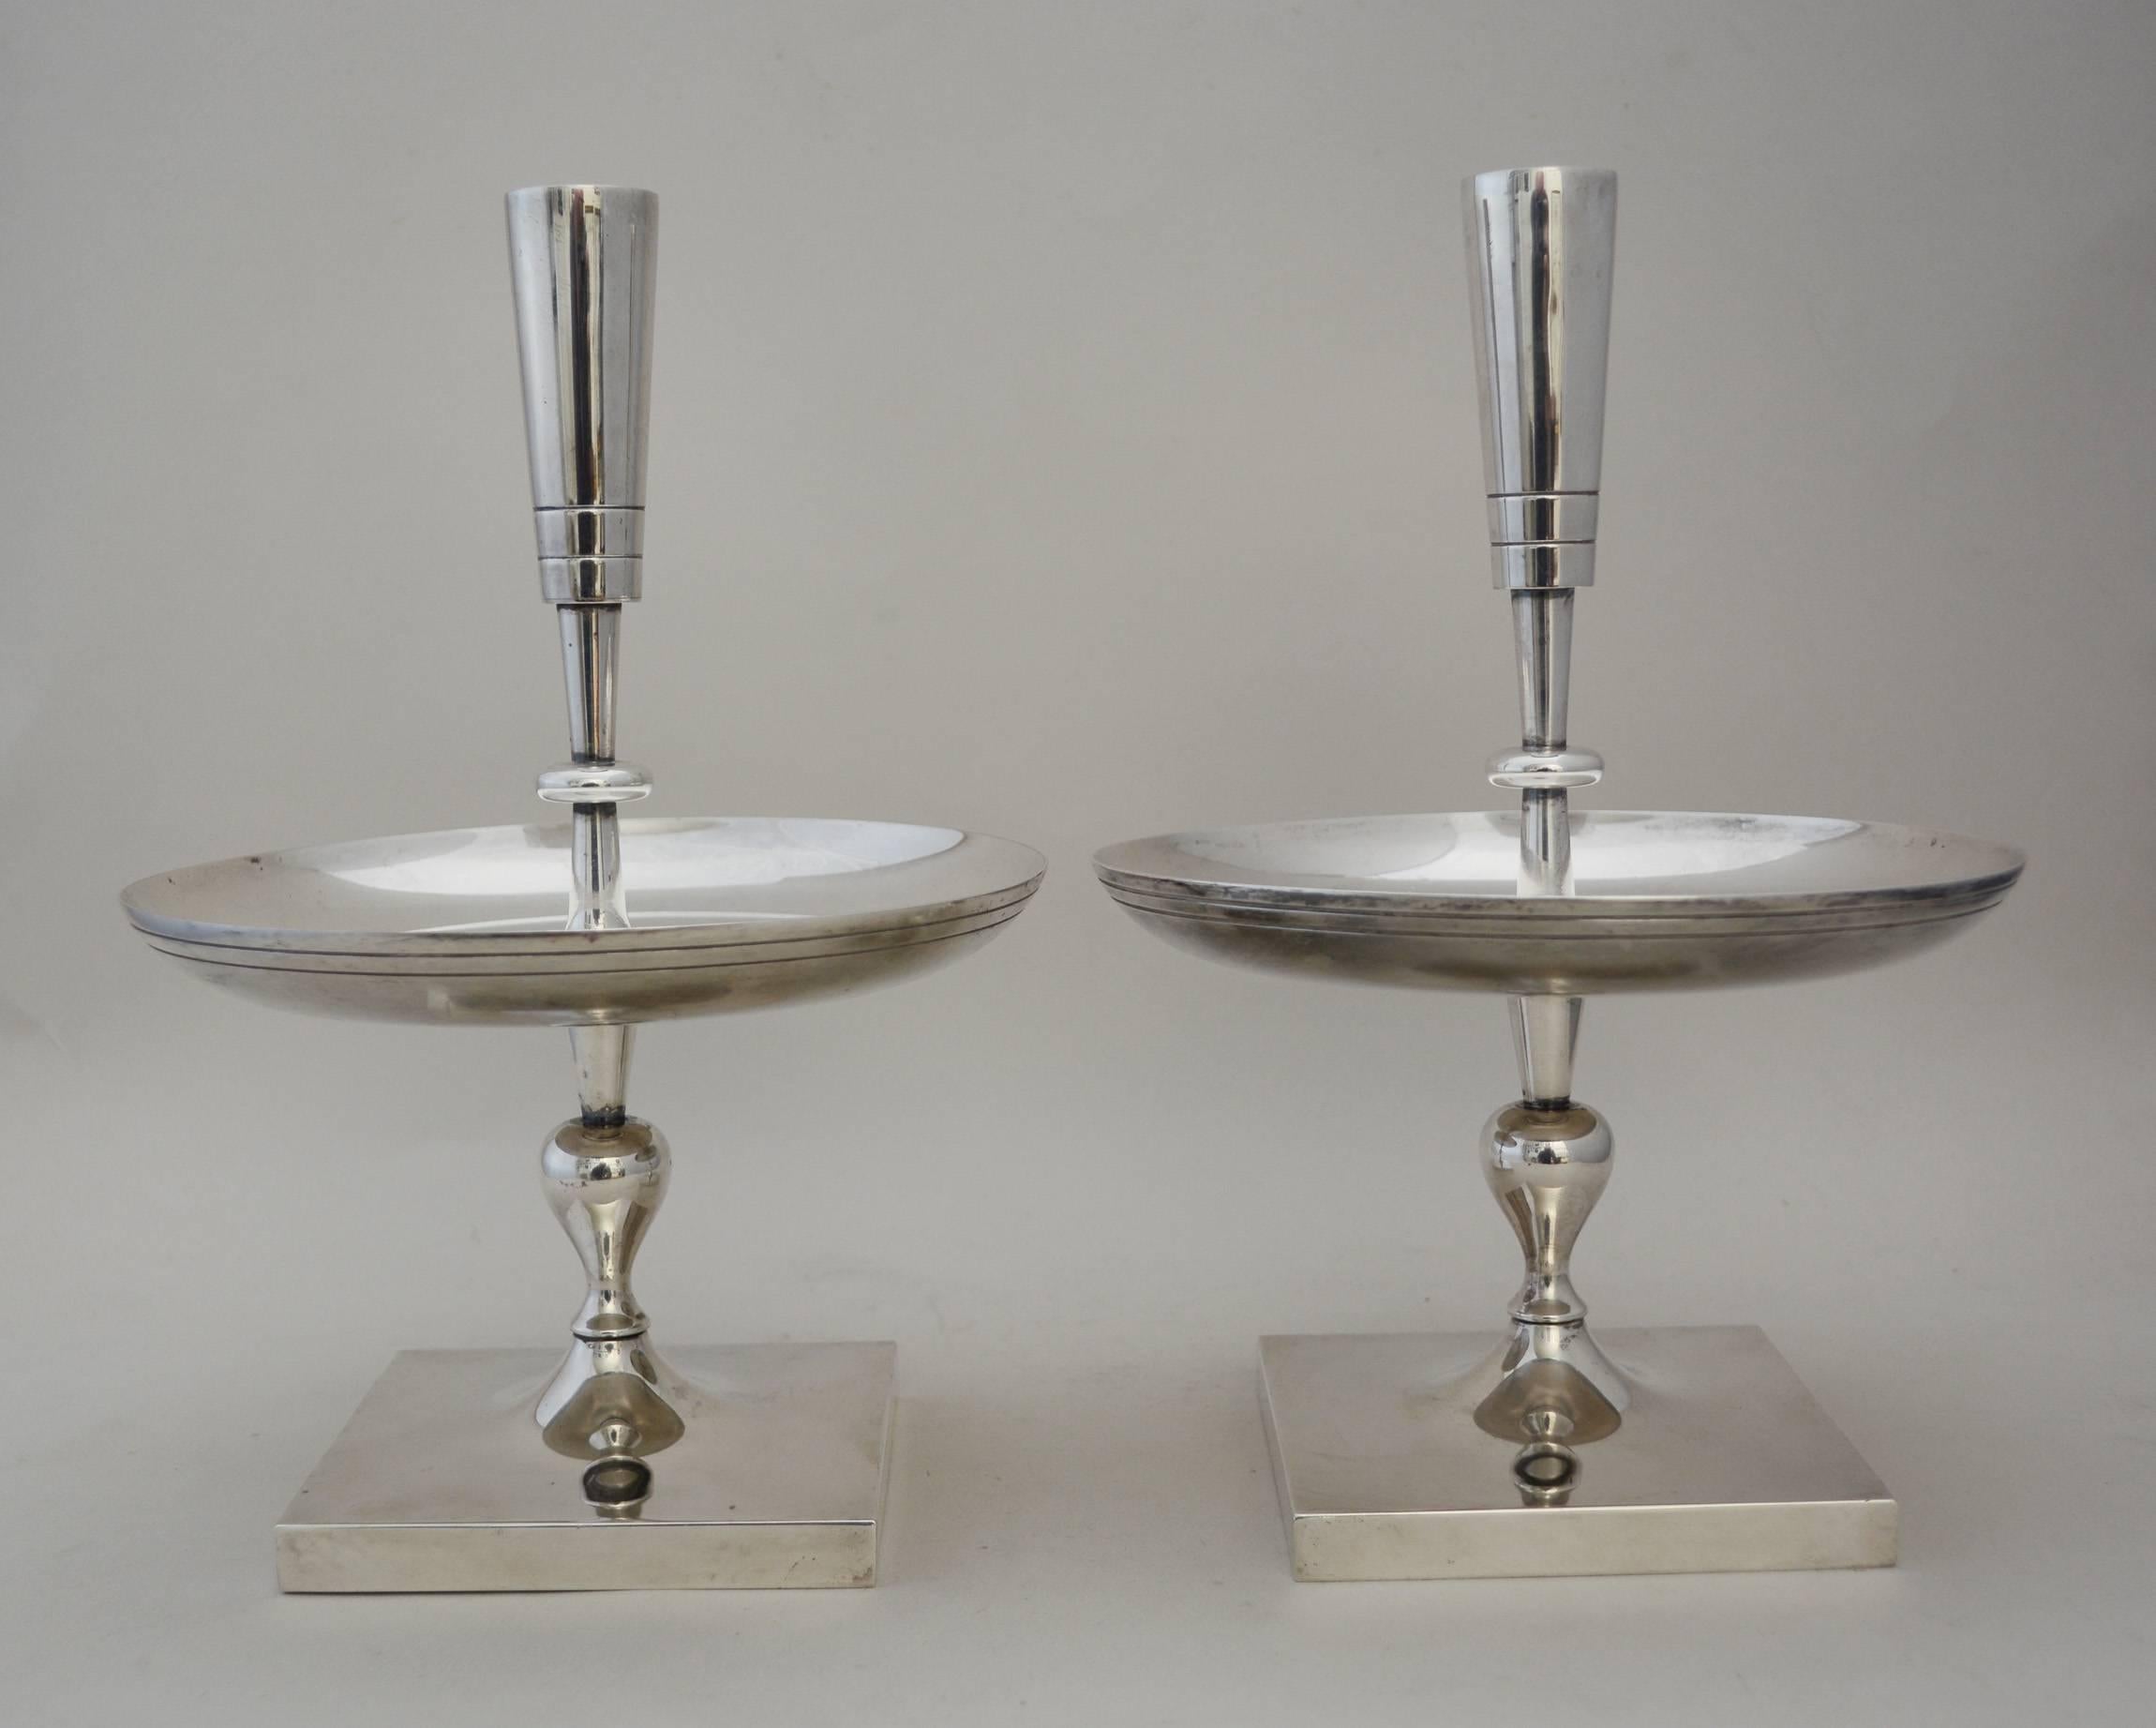 Silver plate candleholders from the Oneida Heirloom 700 line. This line consisted of Tommi Parzinger designs acquired from Dorlyn Silversmiths. There are some areas of slight pitting to the silver plate. One has a small dent.